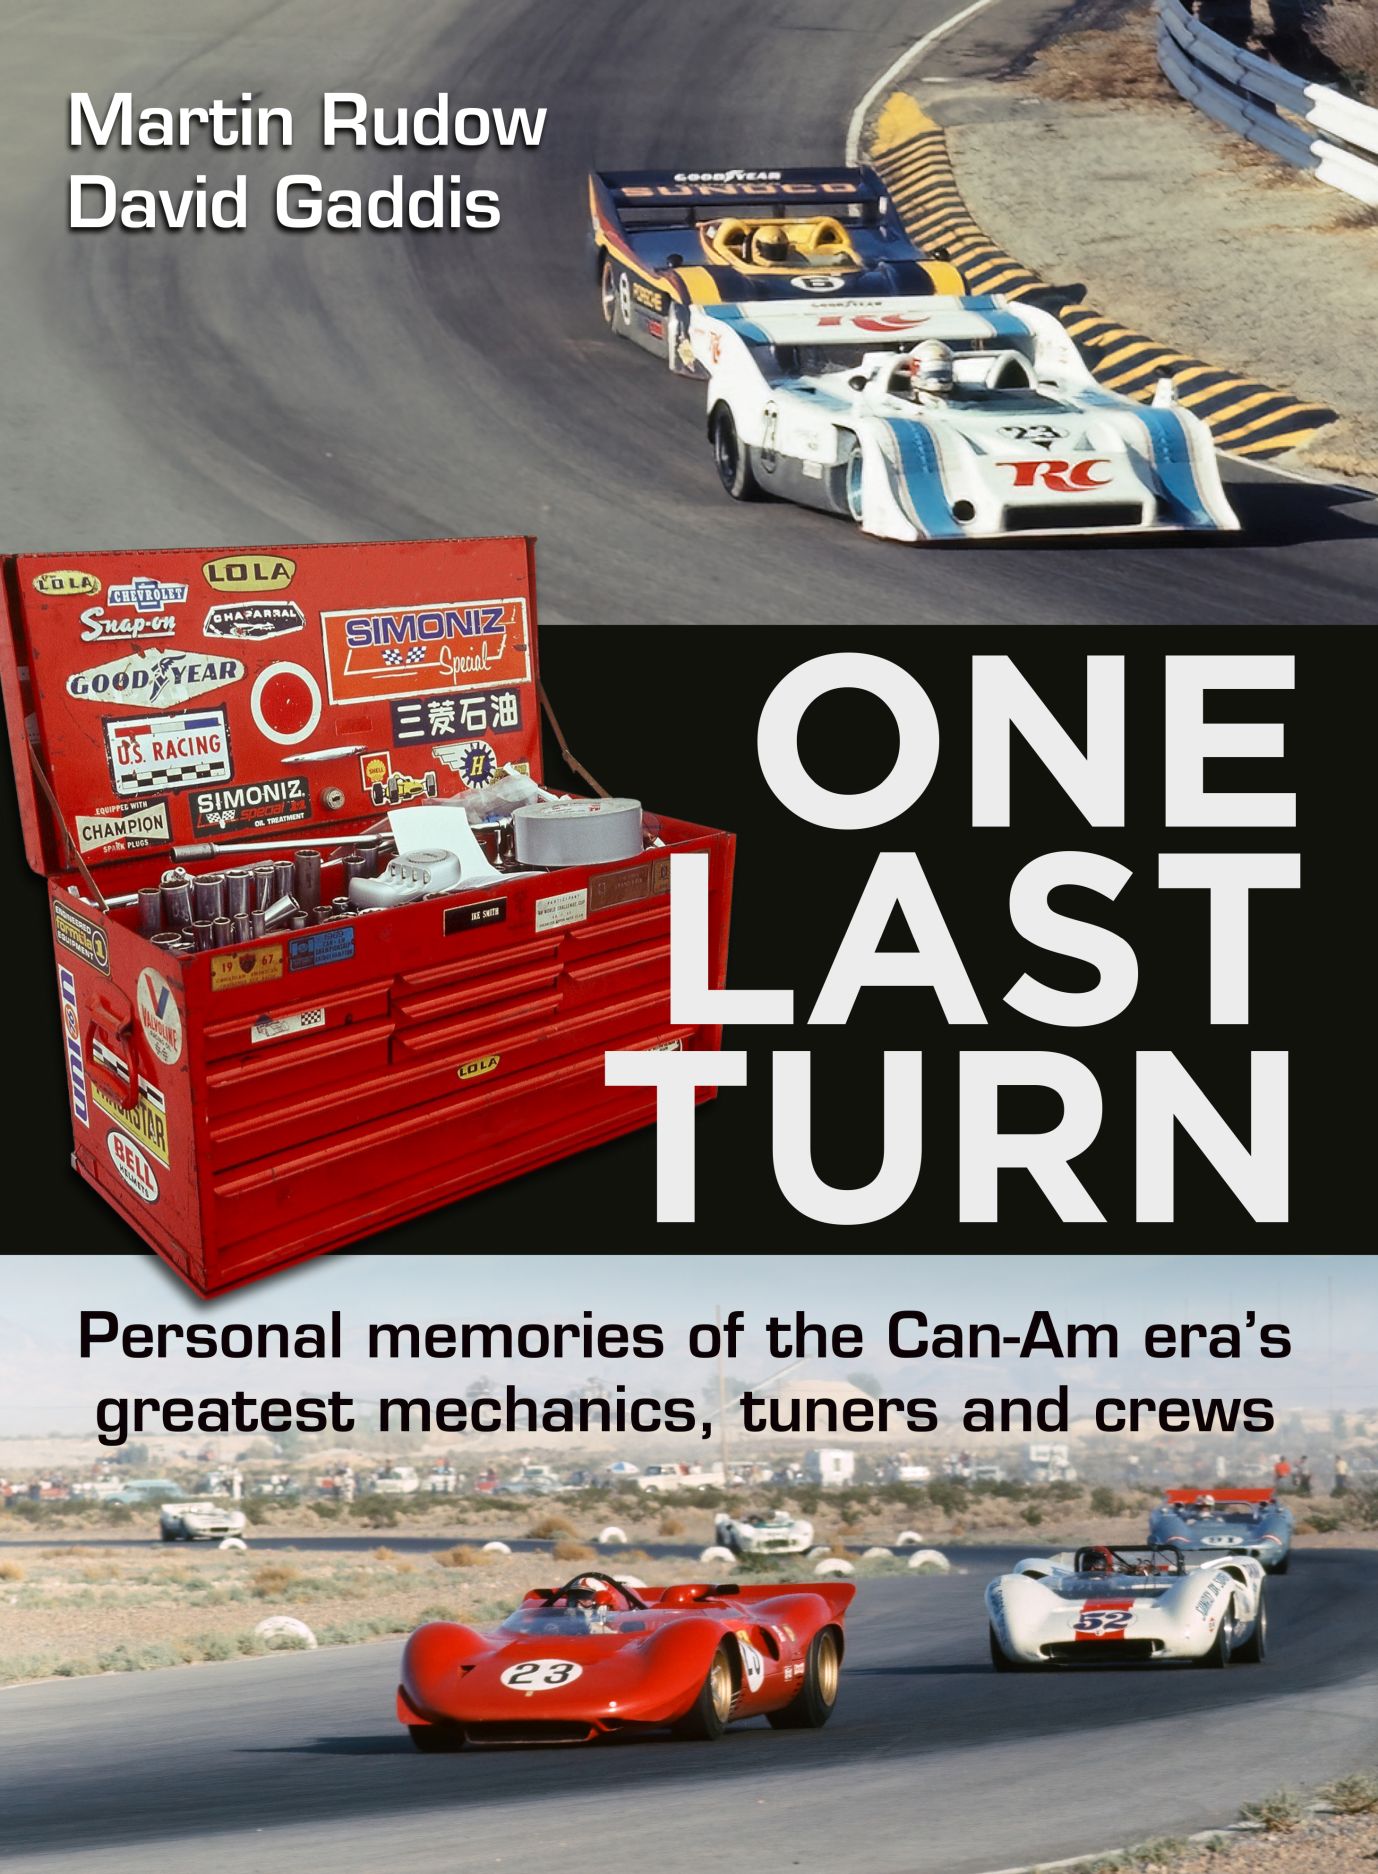 One Last Turn: Personal memories of the Can-Am era\'s greatest mechanics,  tuners and crews, Rudow, Gaddis | Poster